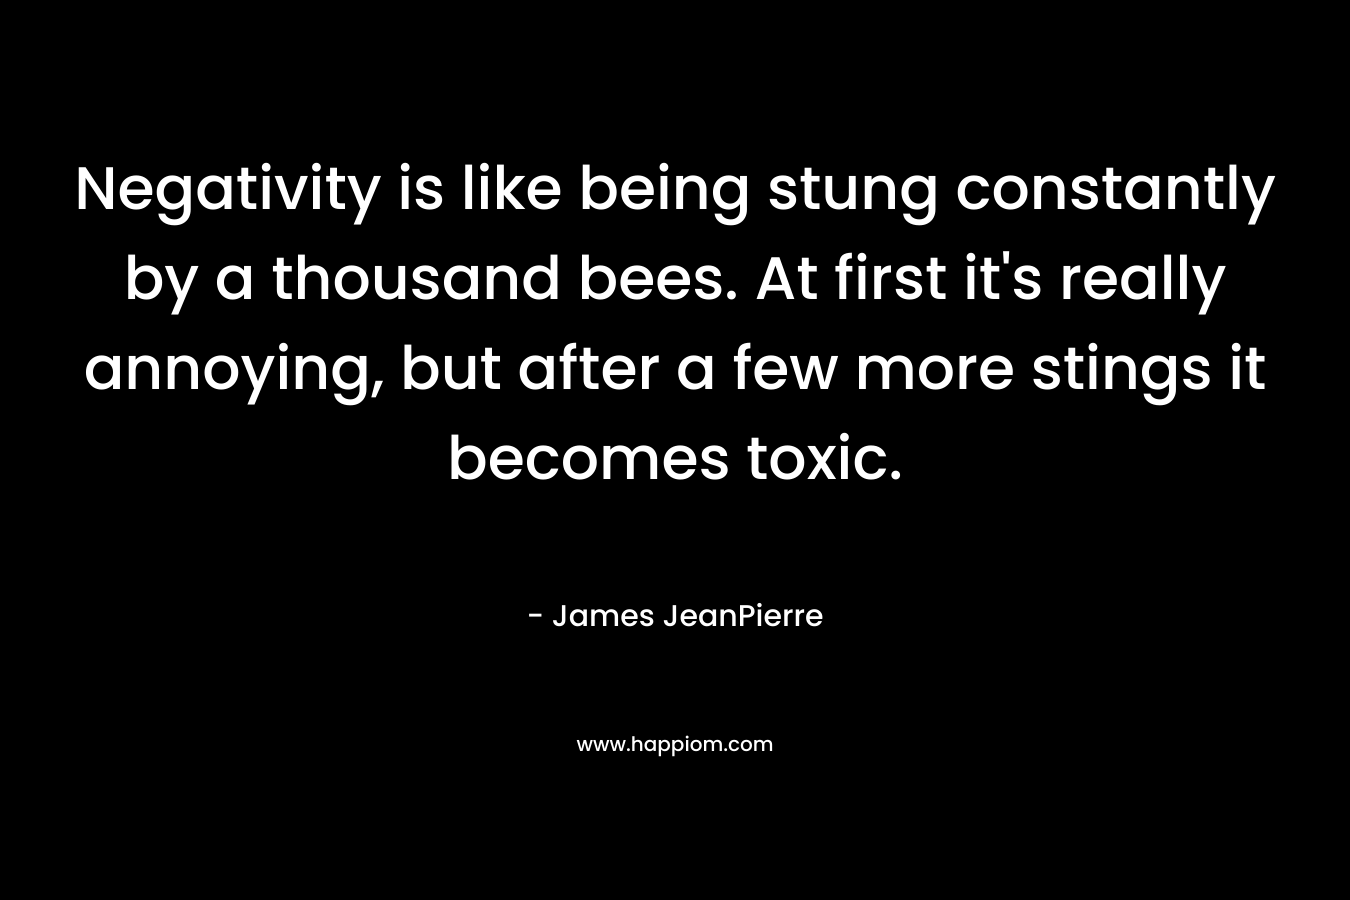 Negativity is like being stung constantly by a thousand bees. At first it’s really annoying, but after a few more stings it becomes toxic. – James JeanPierre